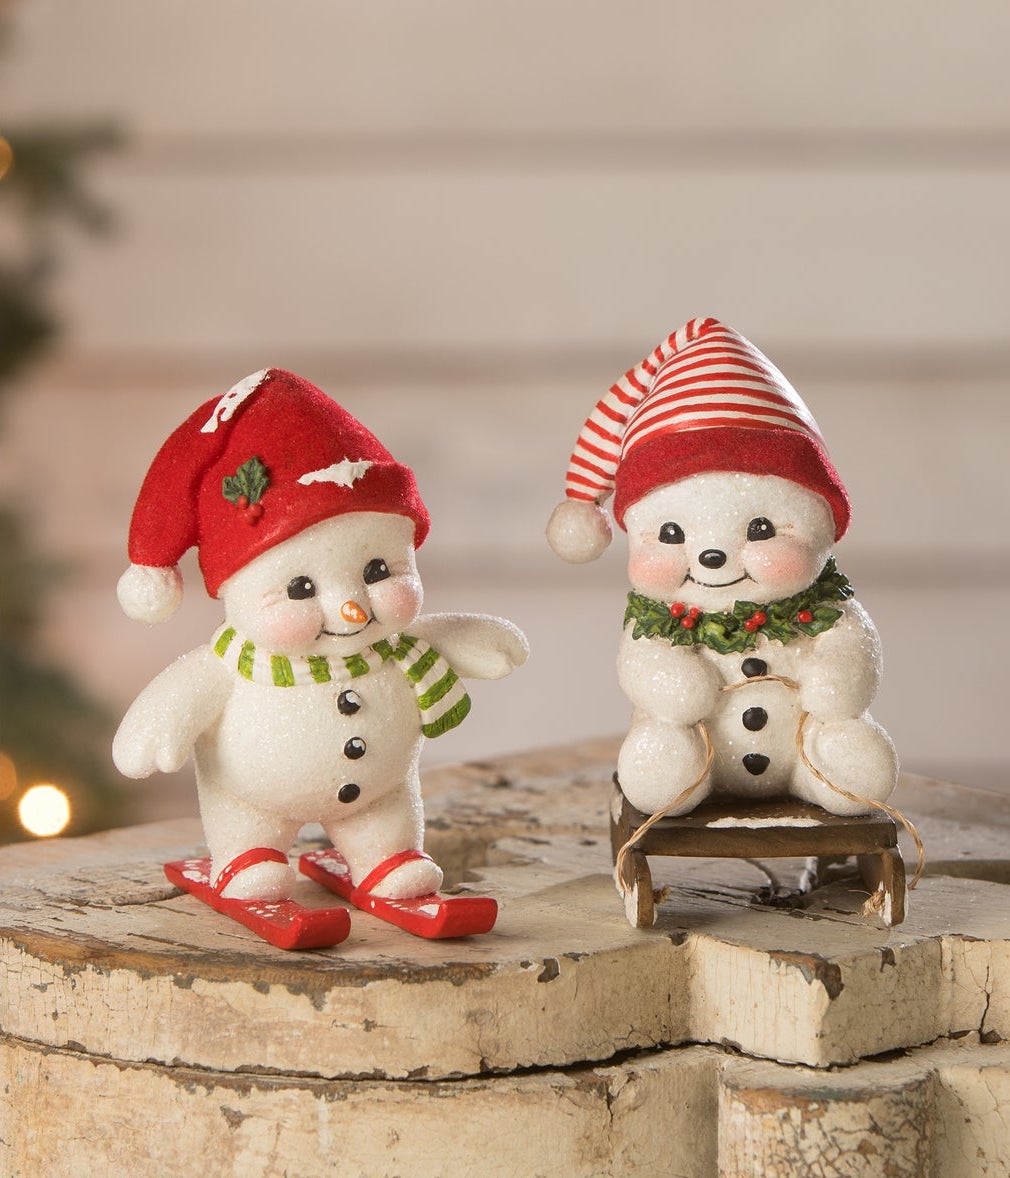 Cute baby snowman figruines by Bethany Lowe